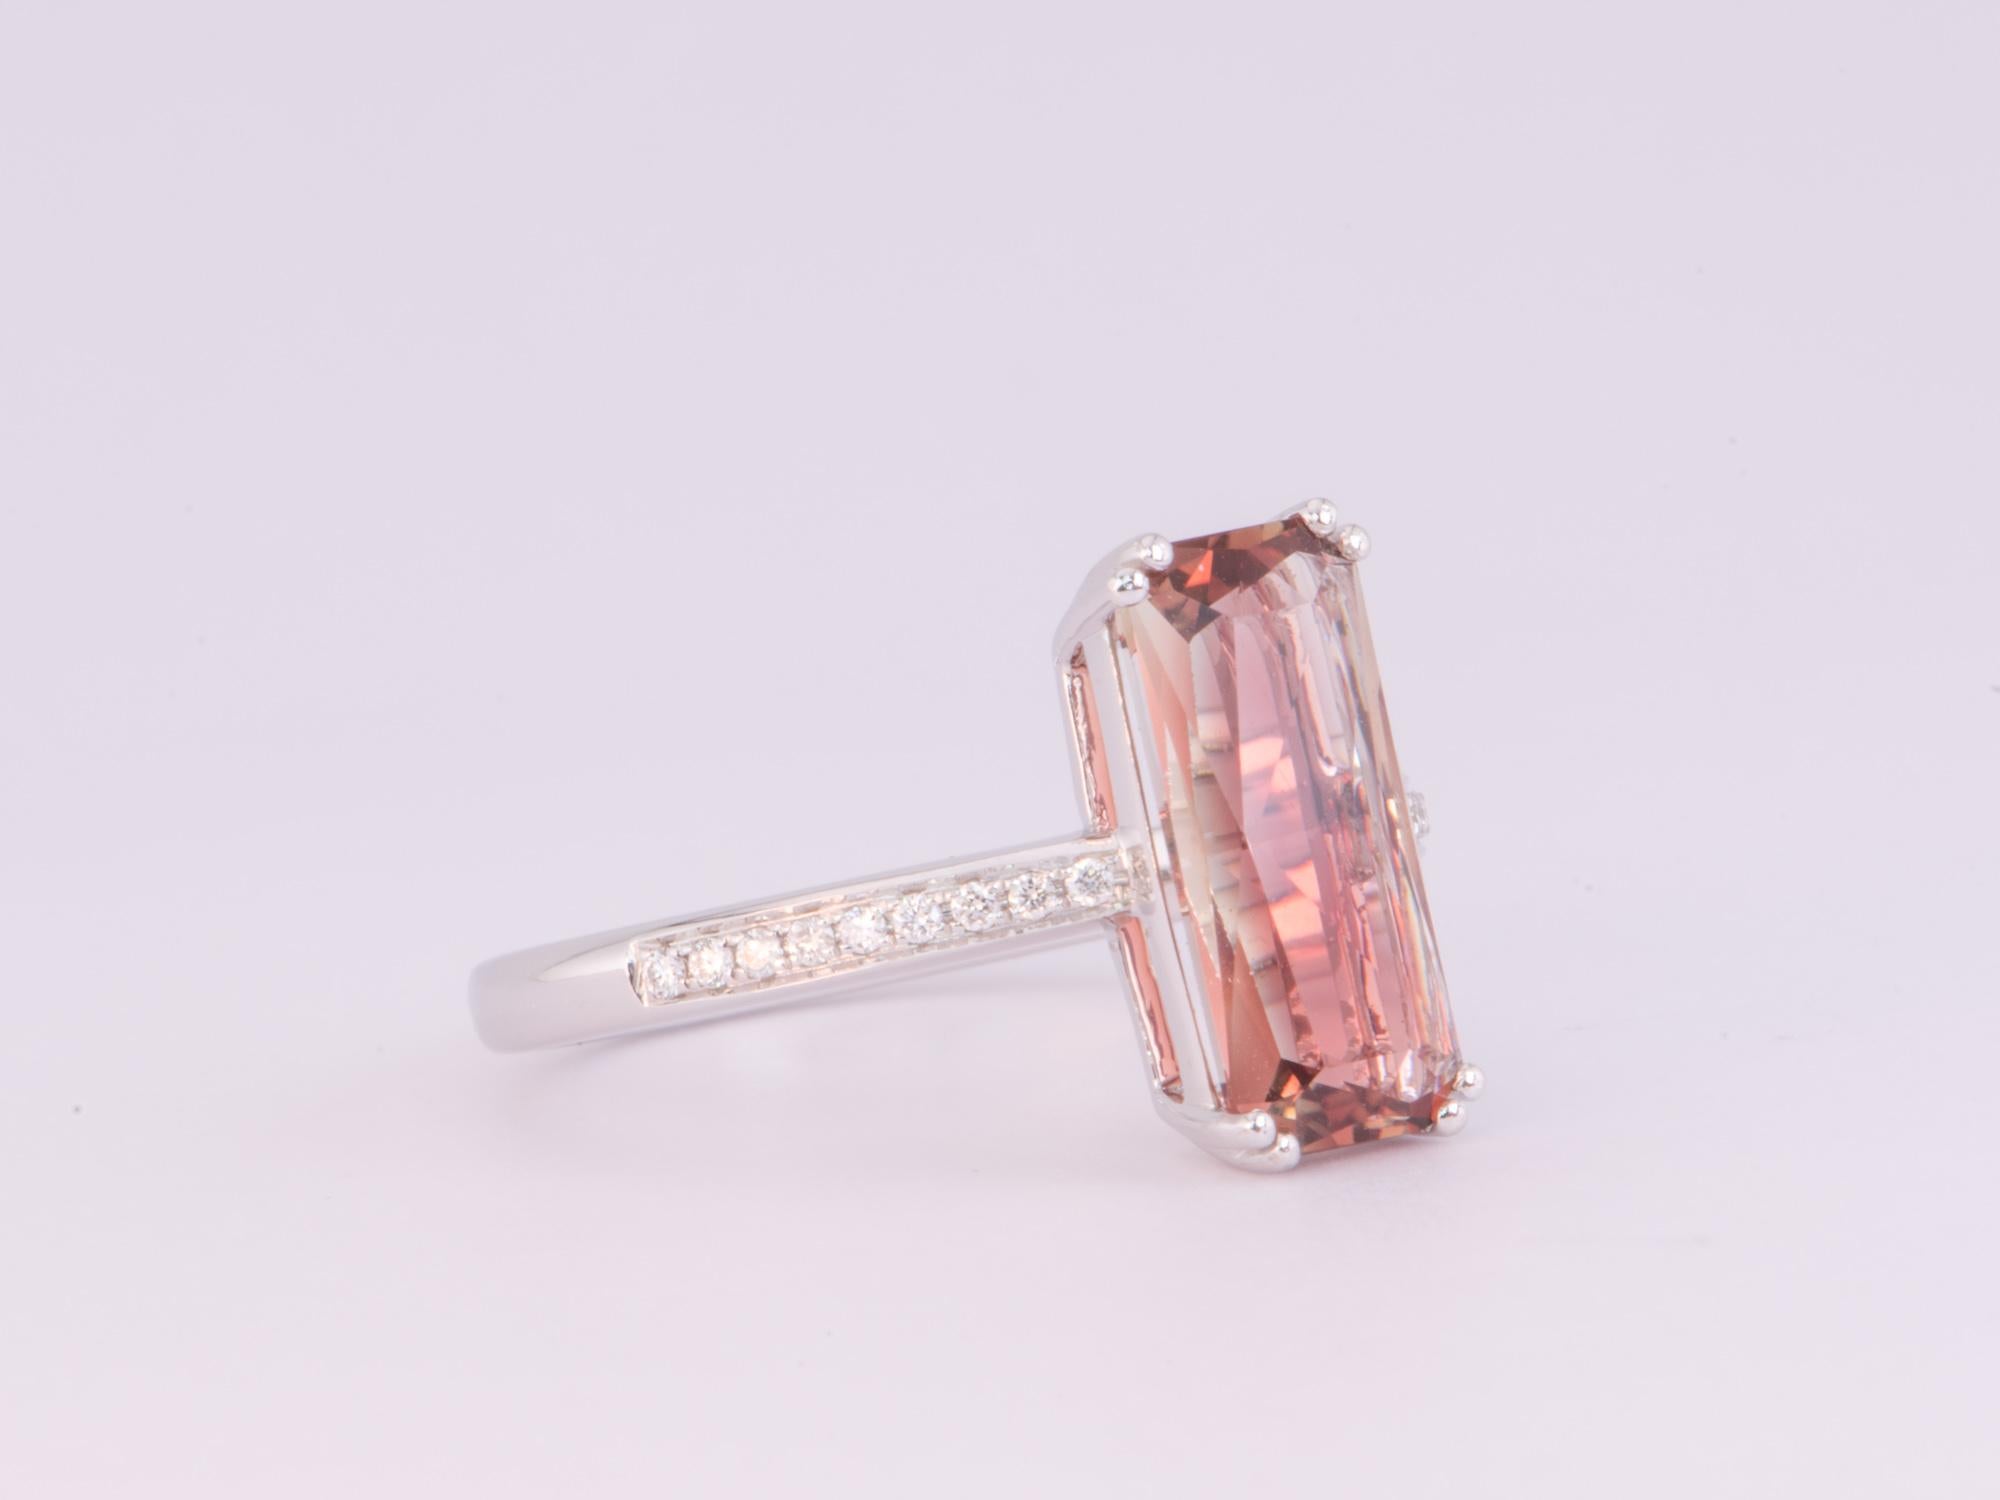 ♥ The item measures 13.5mm in length, 7mm in width, and stands 5.2mm tall from the finger. Band width is 2mm.
♥ Ring size: US Size 7 (Free resizing up or down 1 size)
♥ Material: 14K White Gold
♥ Gemstone: Oregon sunstone, 2.38ct; earth-mined